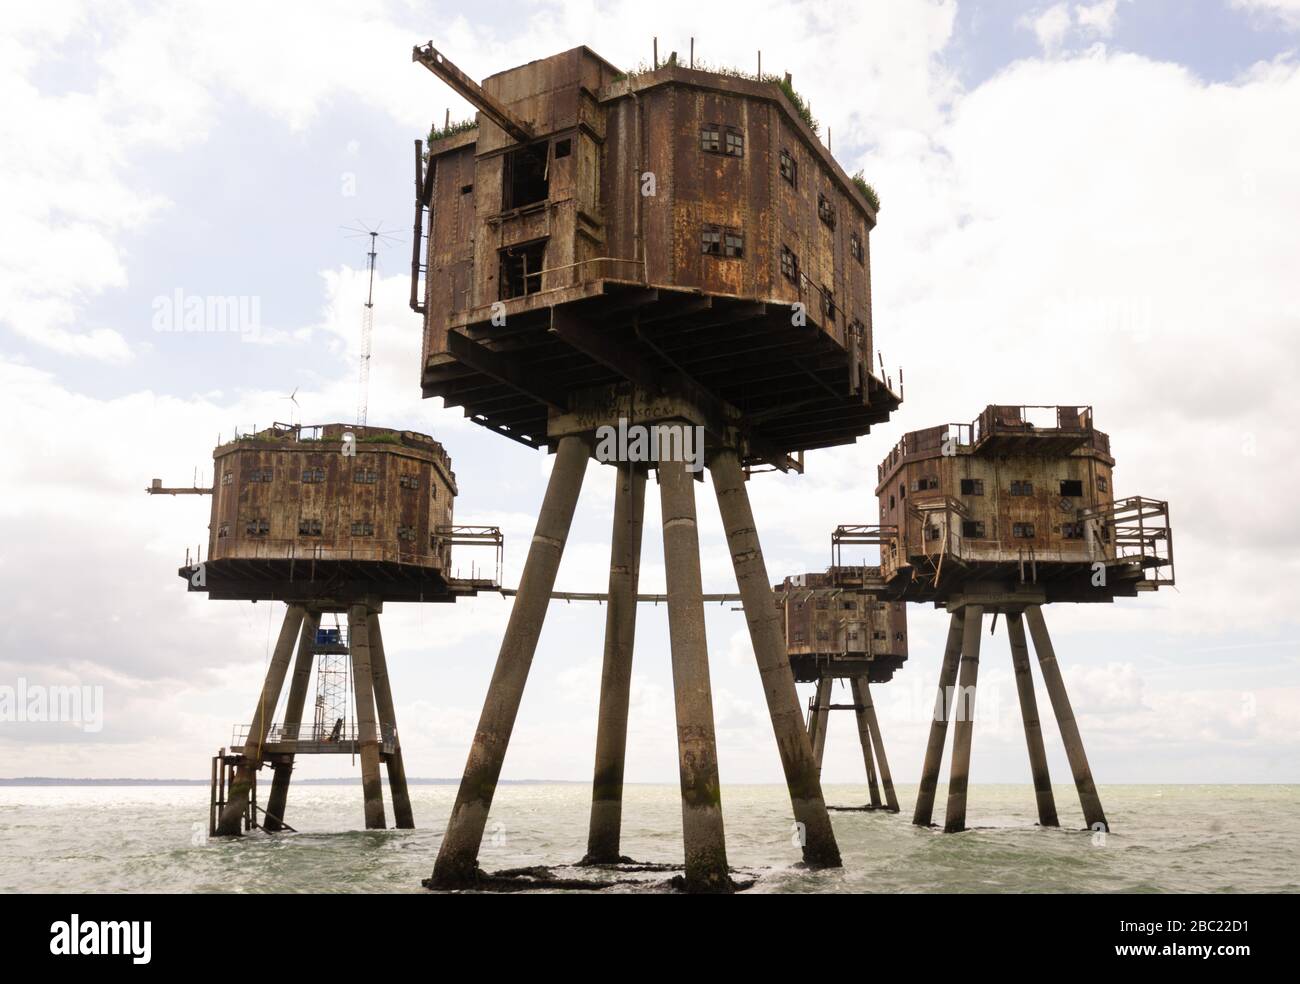 Uncle 6 Redsands, Maunsell forts, Thames Estuary, UK Stock Photo